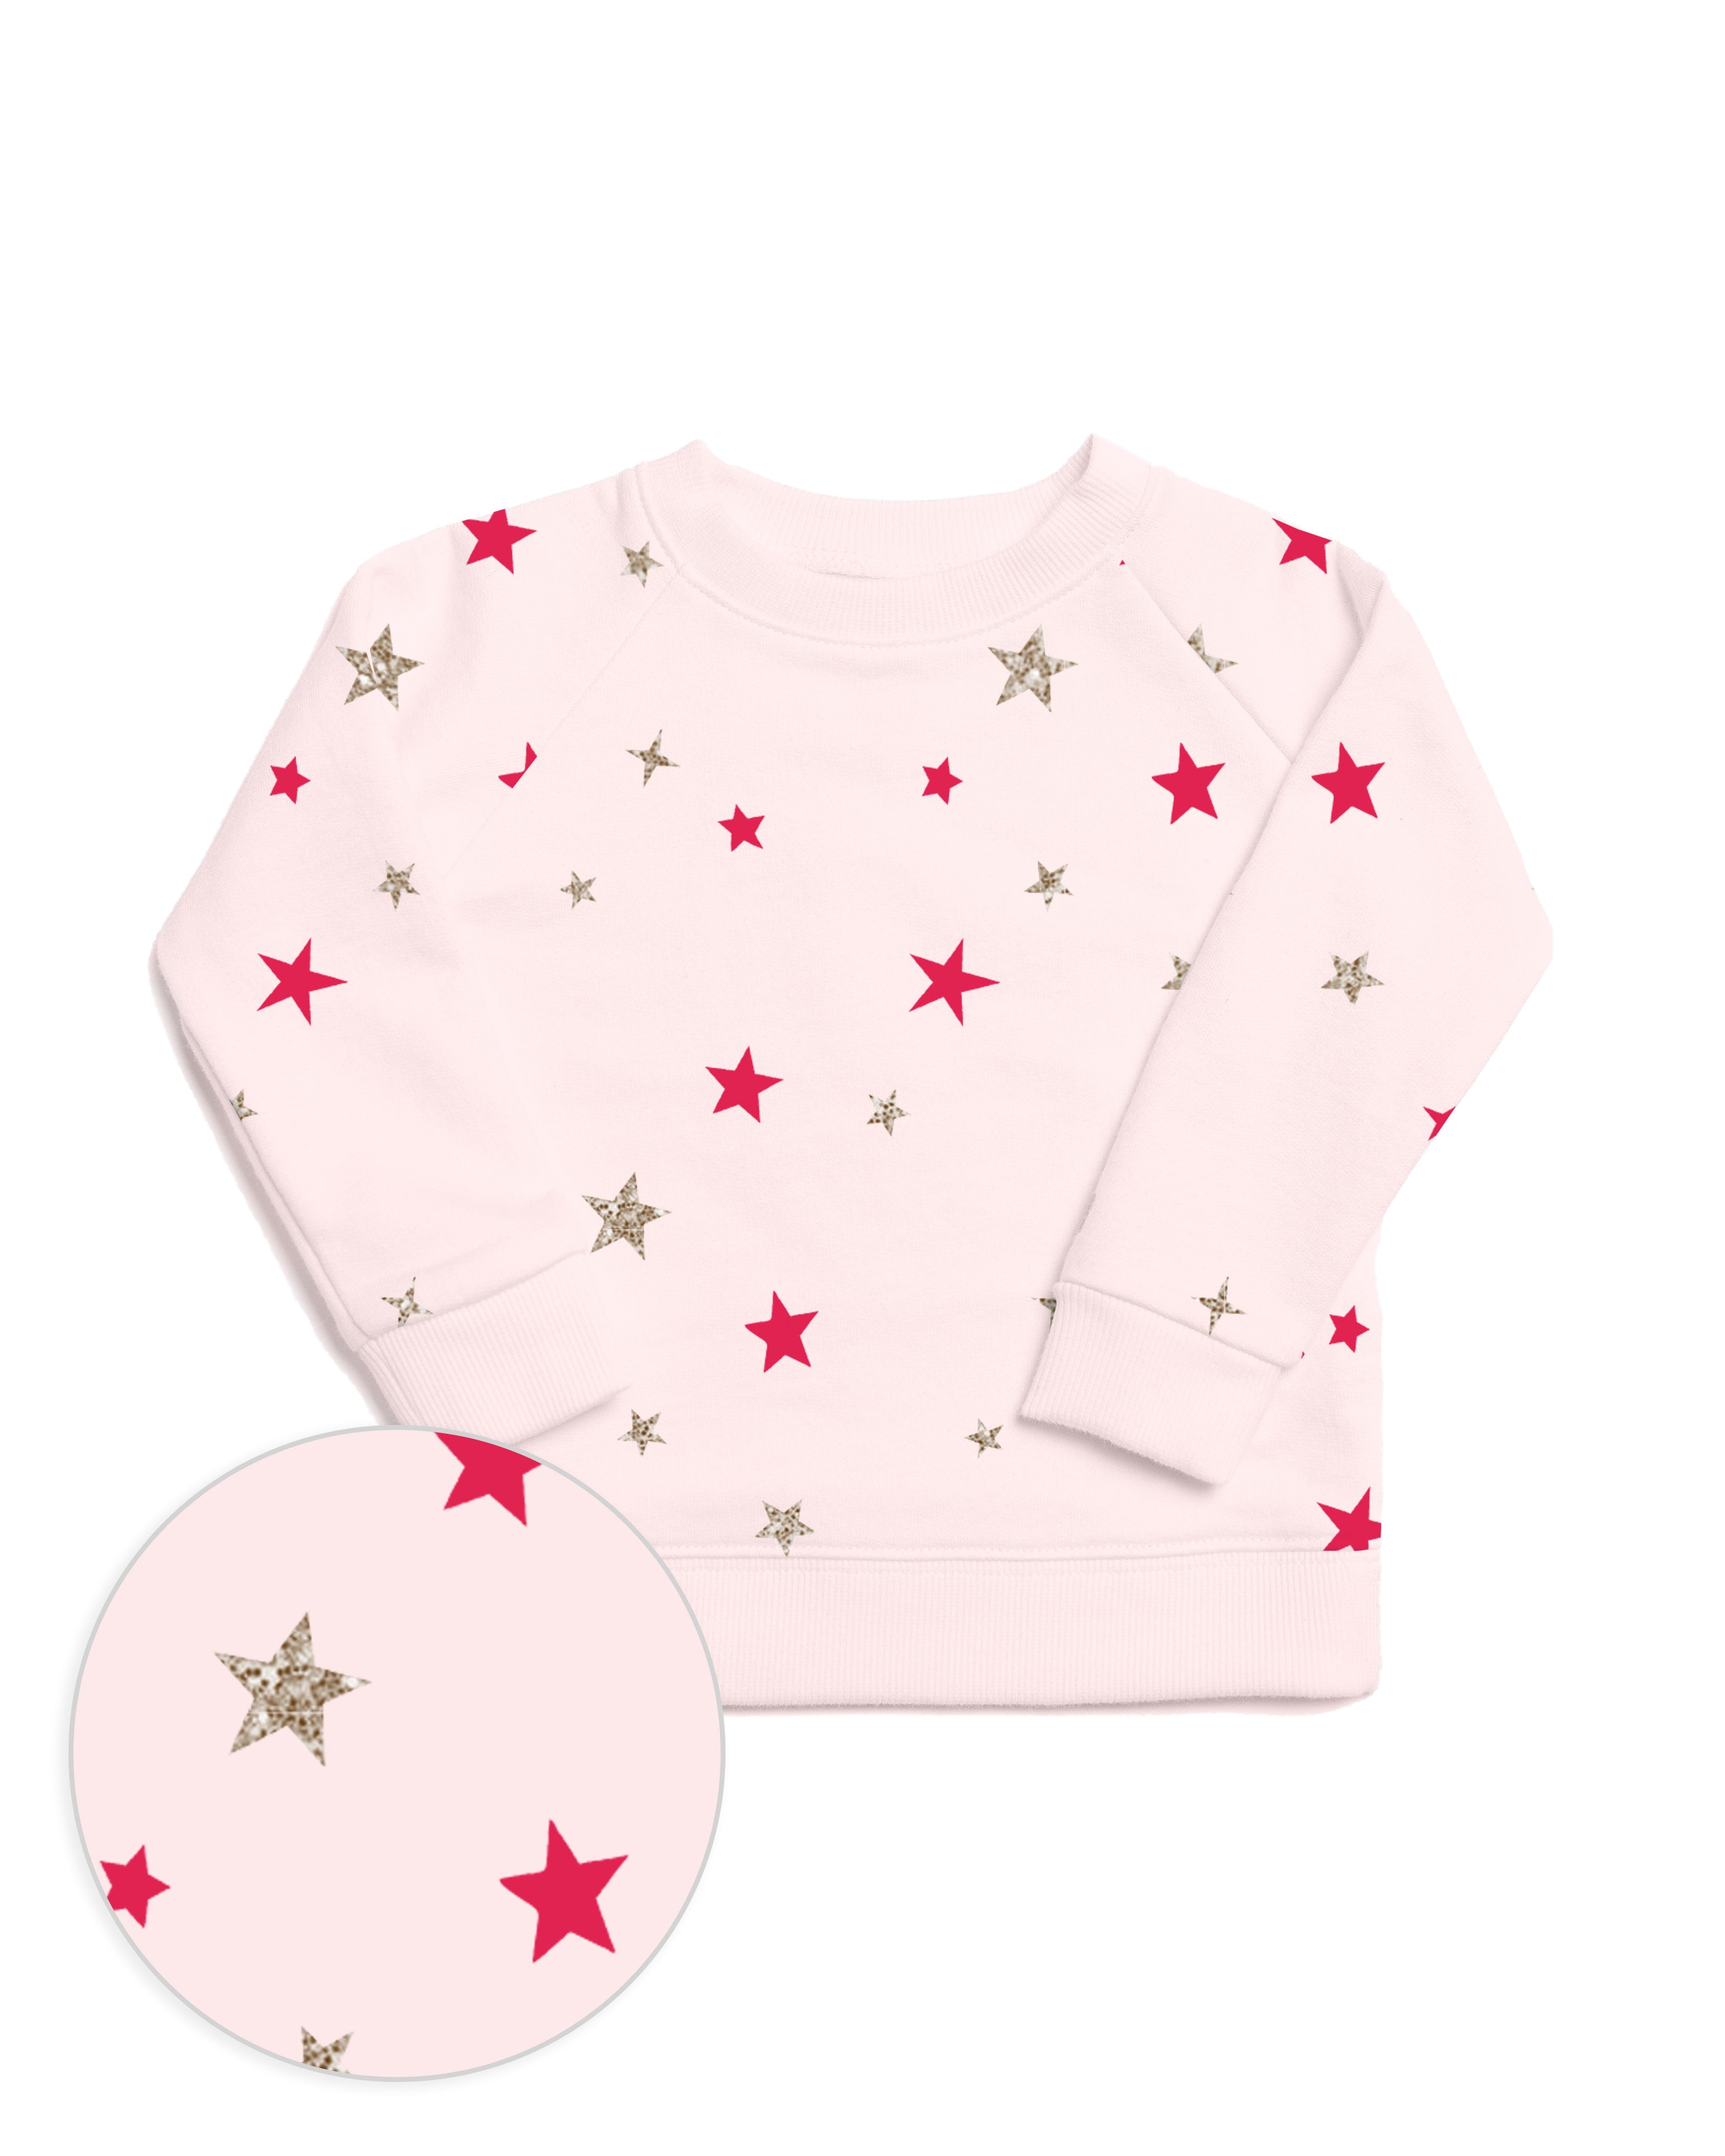 The Organic Printed Pullover Sweatshirt #color_Sparkle Stars